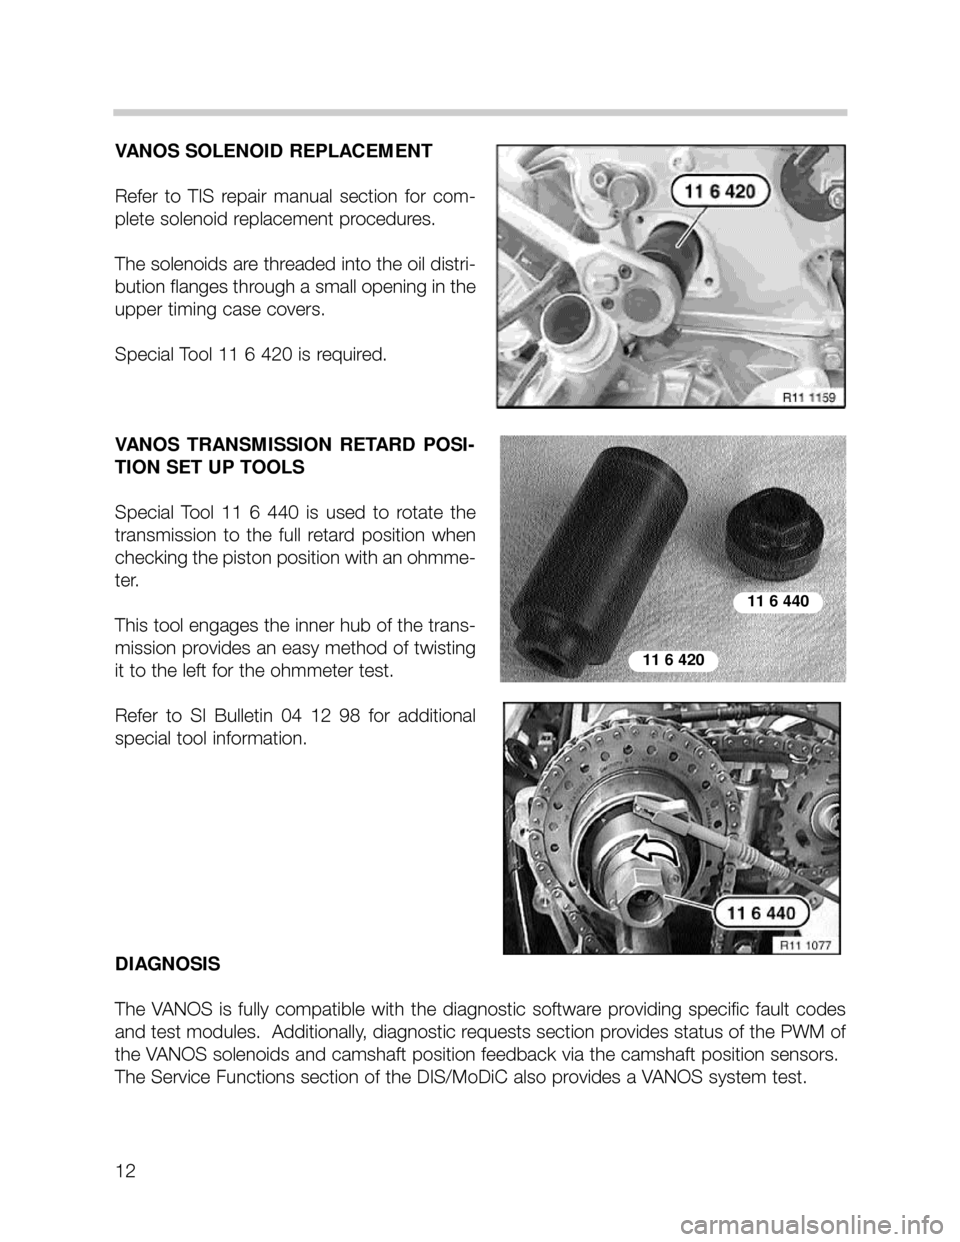 BMW X5 1999 E53 M62TU Engine Workshop Manual 12
VANOS SOLENOID REPLACEMENT
Refer  to  TIS  repair  manual  section  for  com-
plete solenoid replacement procedures.  
The solenoids are threaded into the oil distri-
bution flanges through a small